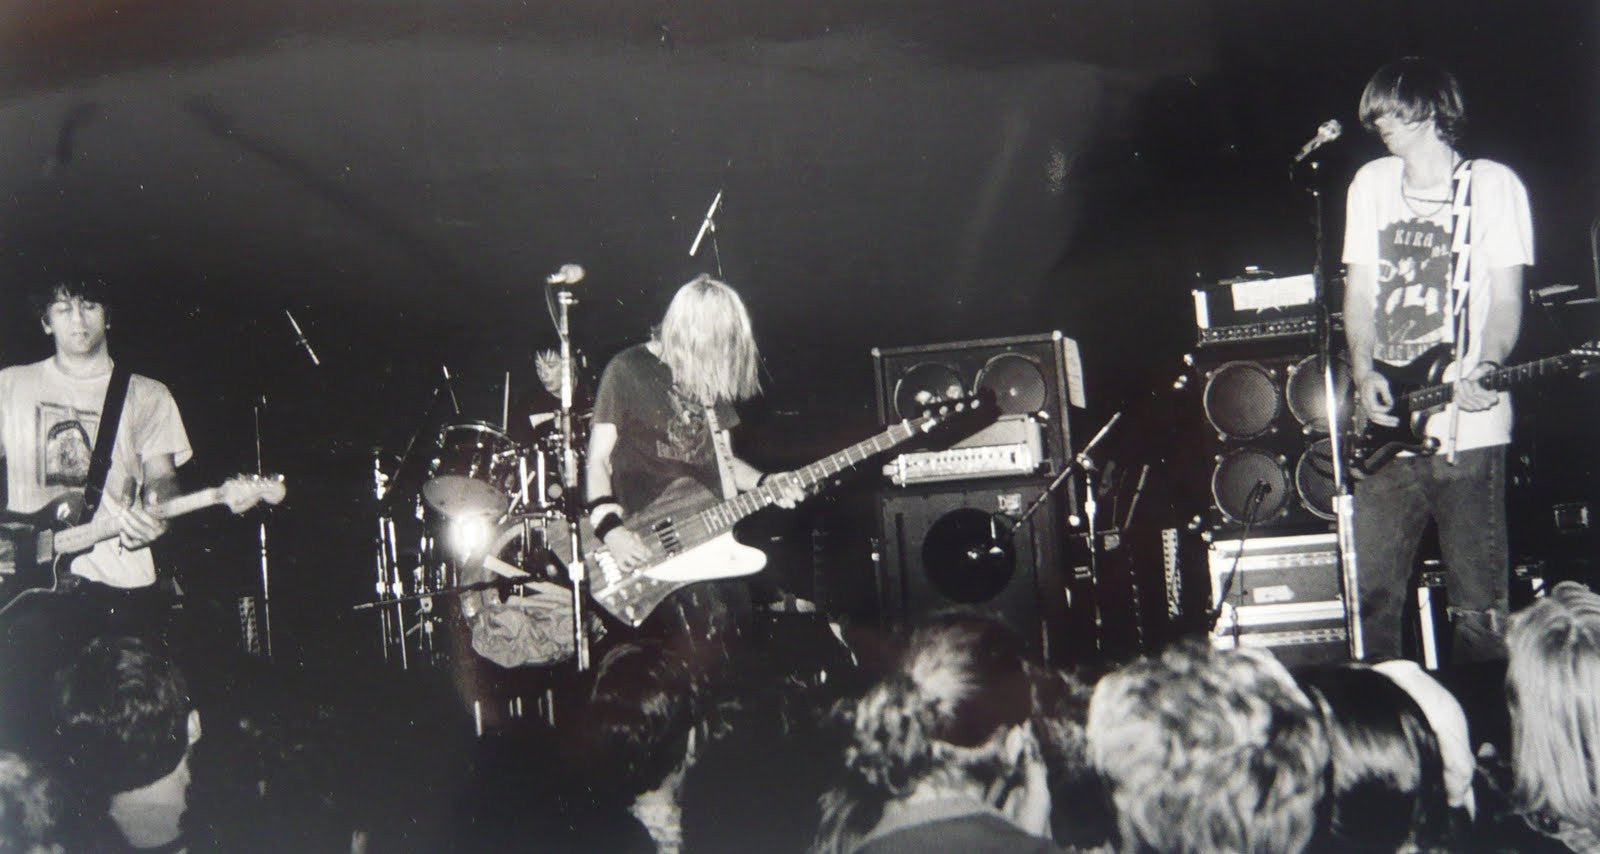 Sonic Youth live show from the 80s